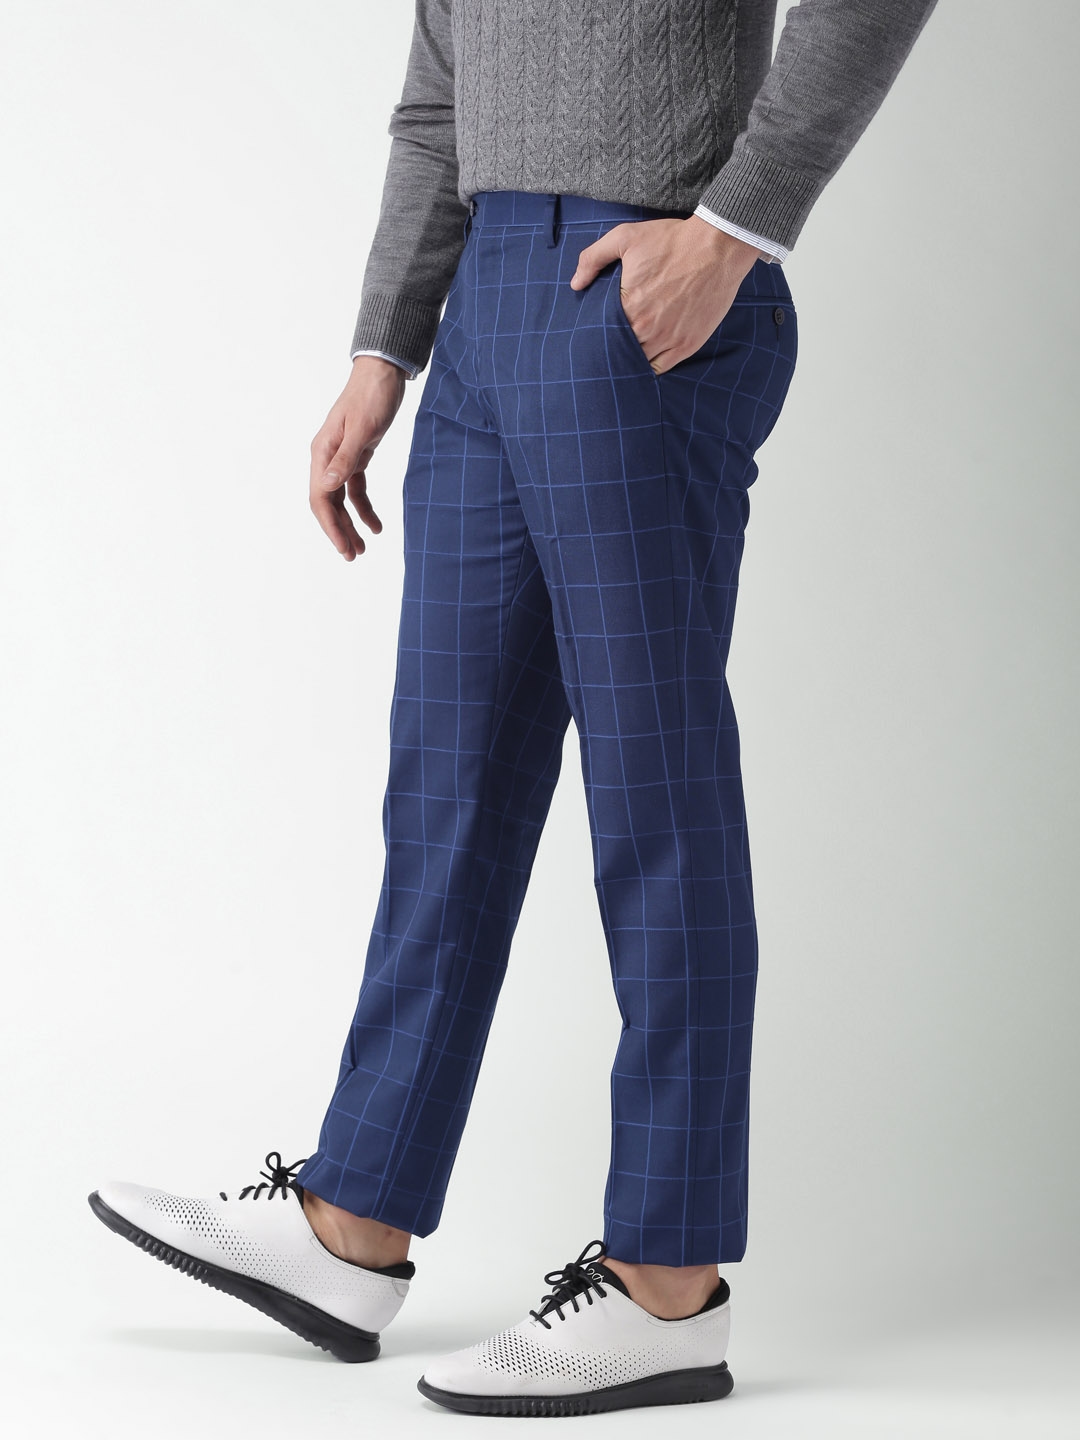 Jeans & Trousers | Blue Formal Pants | Freeup-atpcosmetics.com.vn